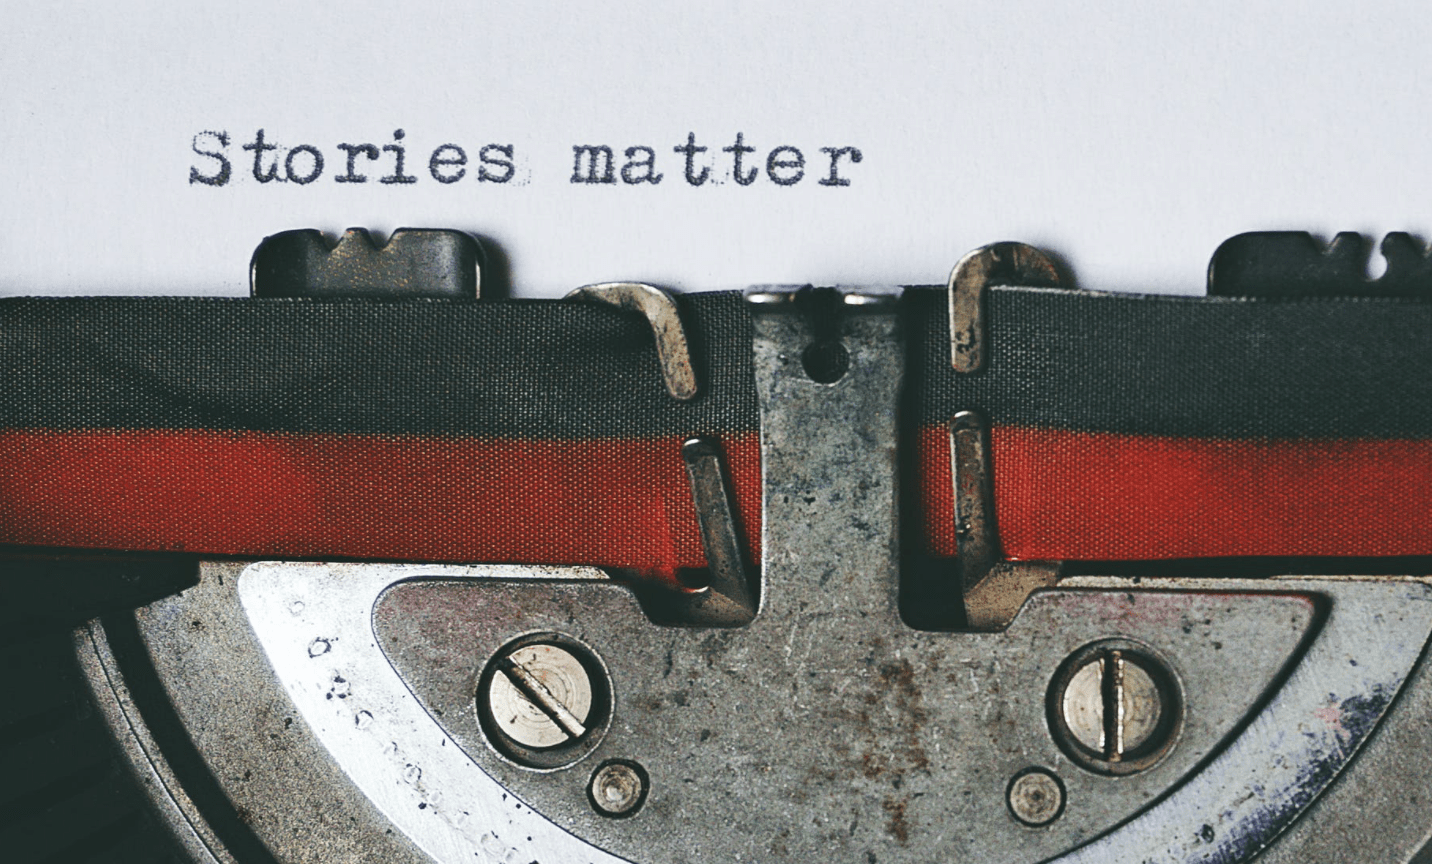 Why Storytelling is Important & Why Stories Matter